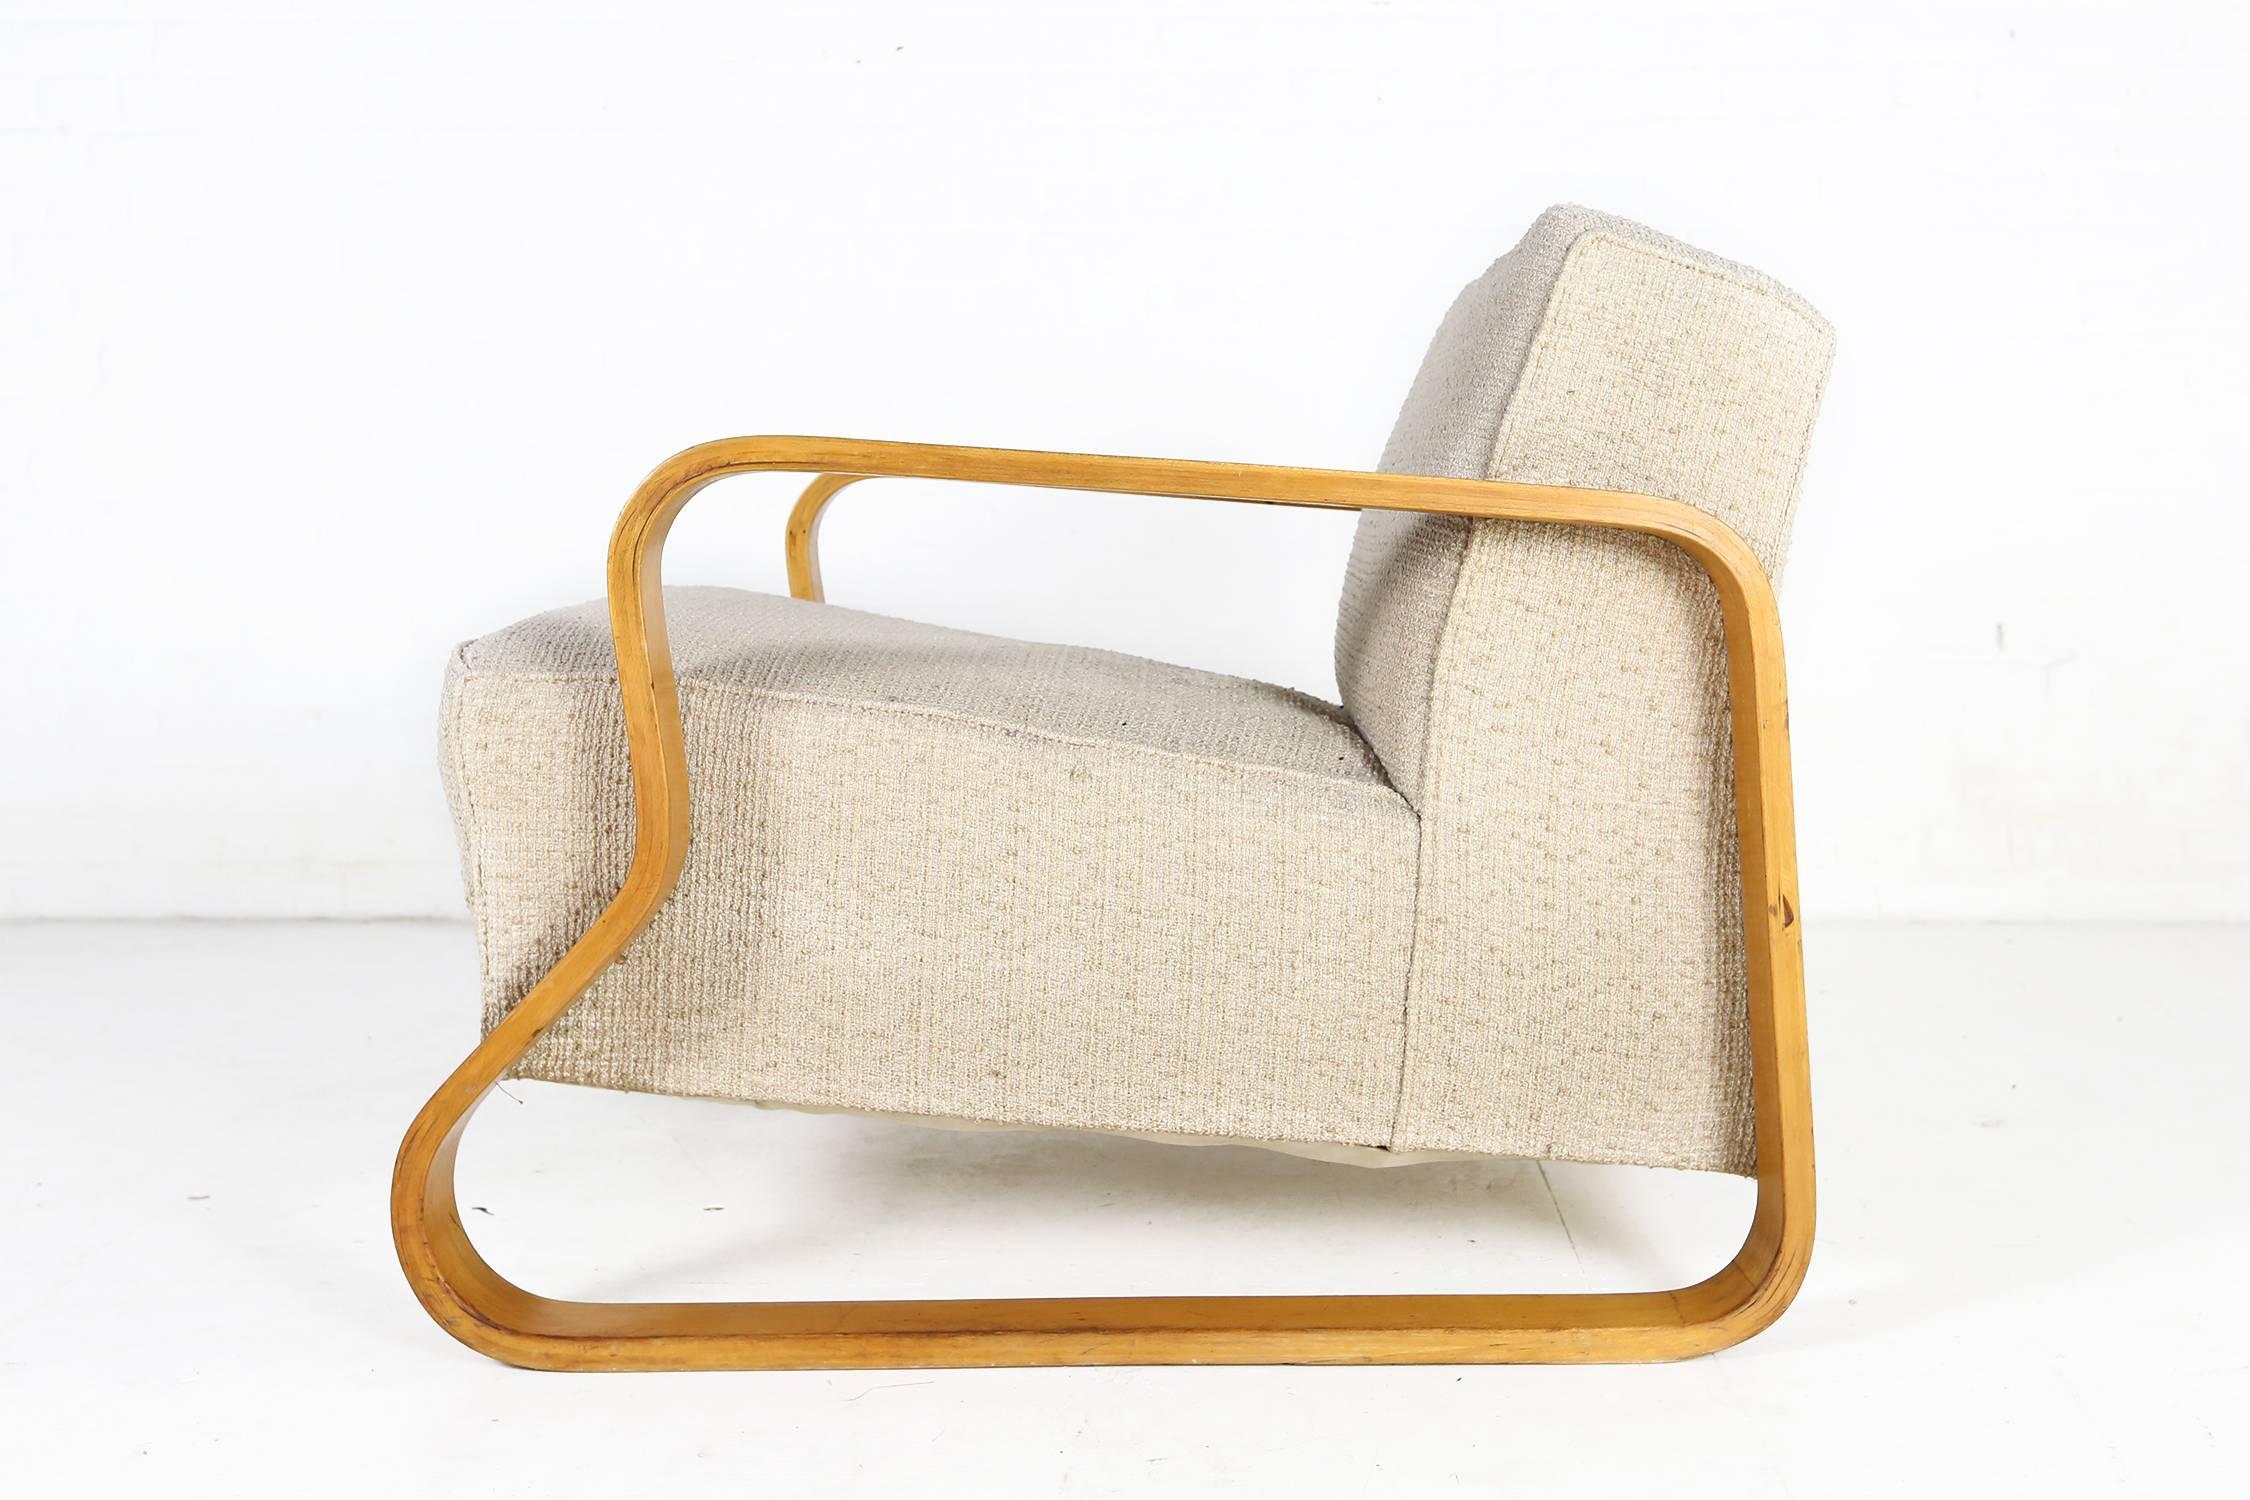 Model 44 lounge chair by Alvar Aalto, made in Finland, circa 1930.

The low-set Aalto Lounge chair was first designed by Alvar Aalto in 1935. Aalto developed a revolutionary technique for bending thick layers of birch laminate into indented closed